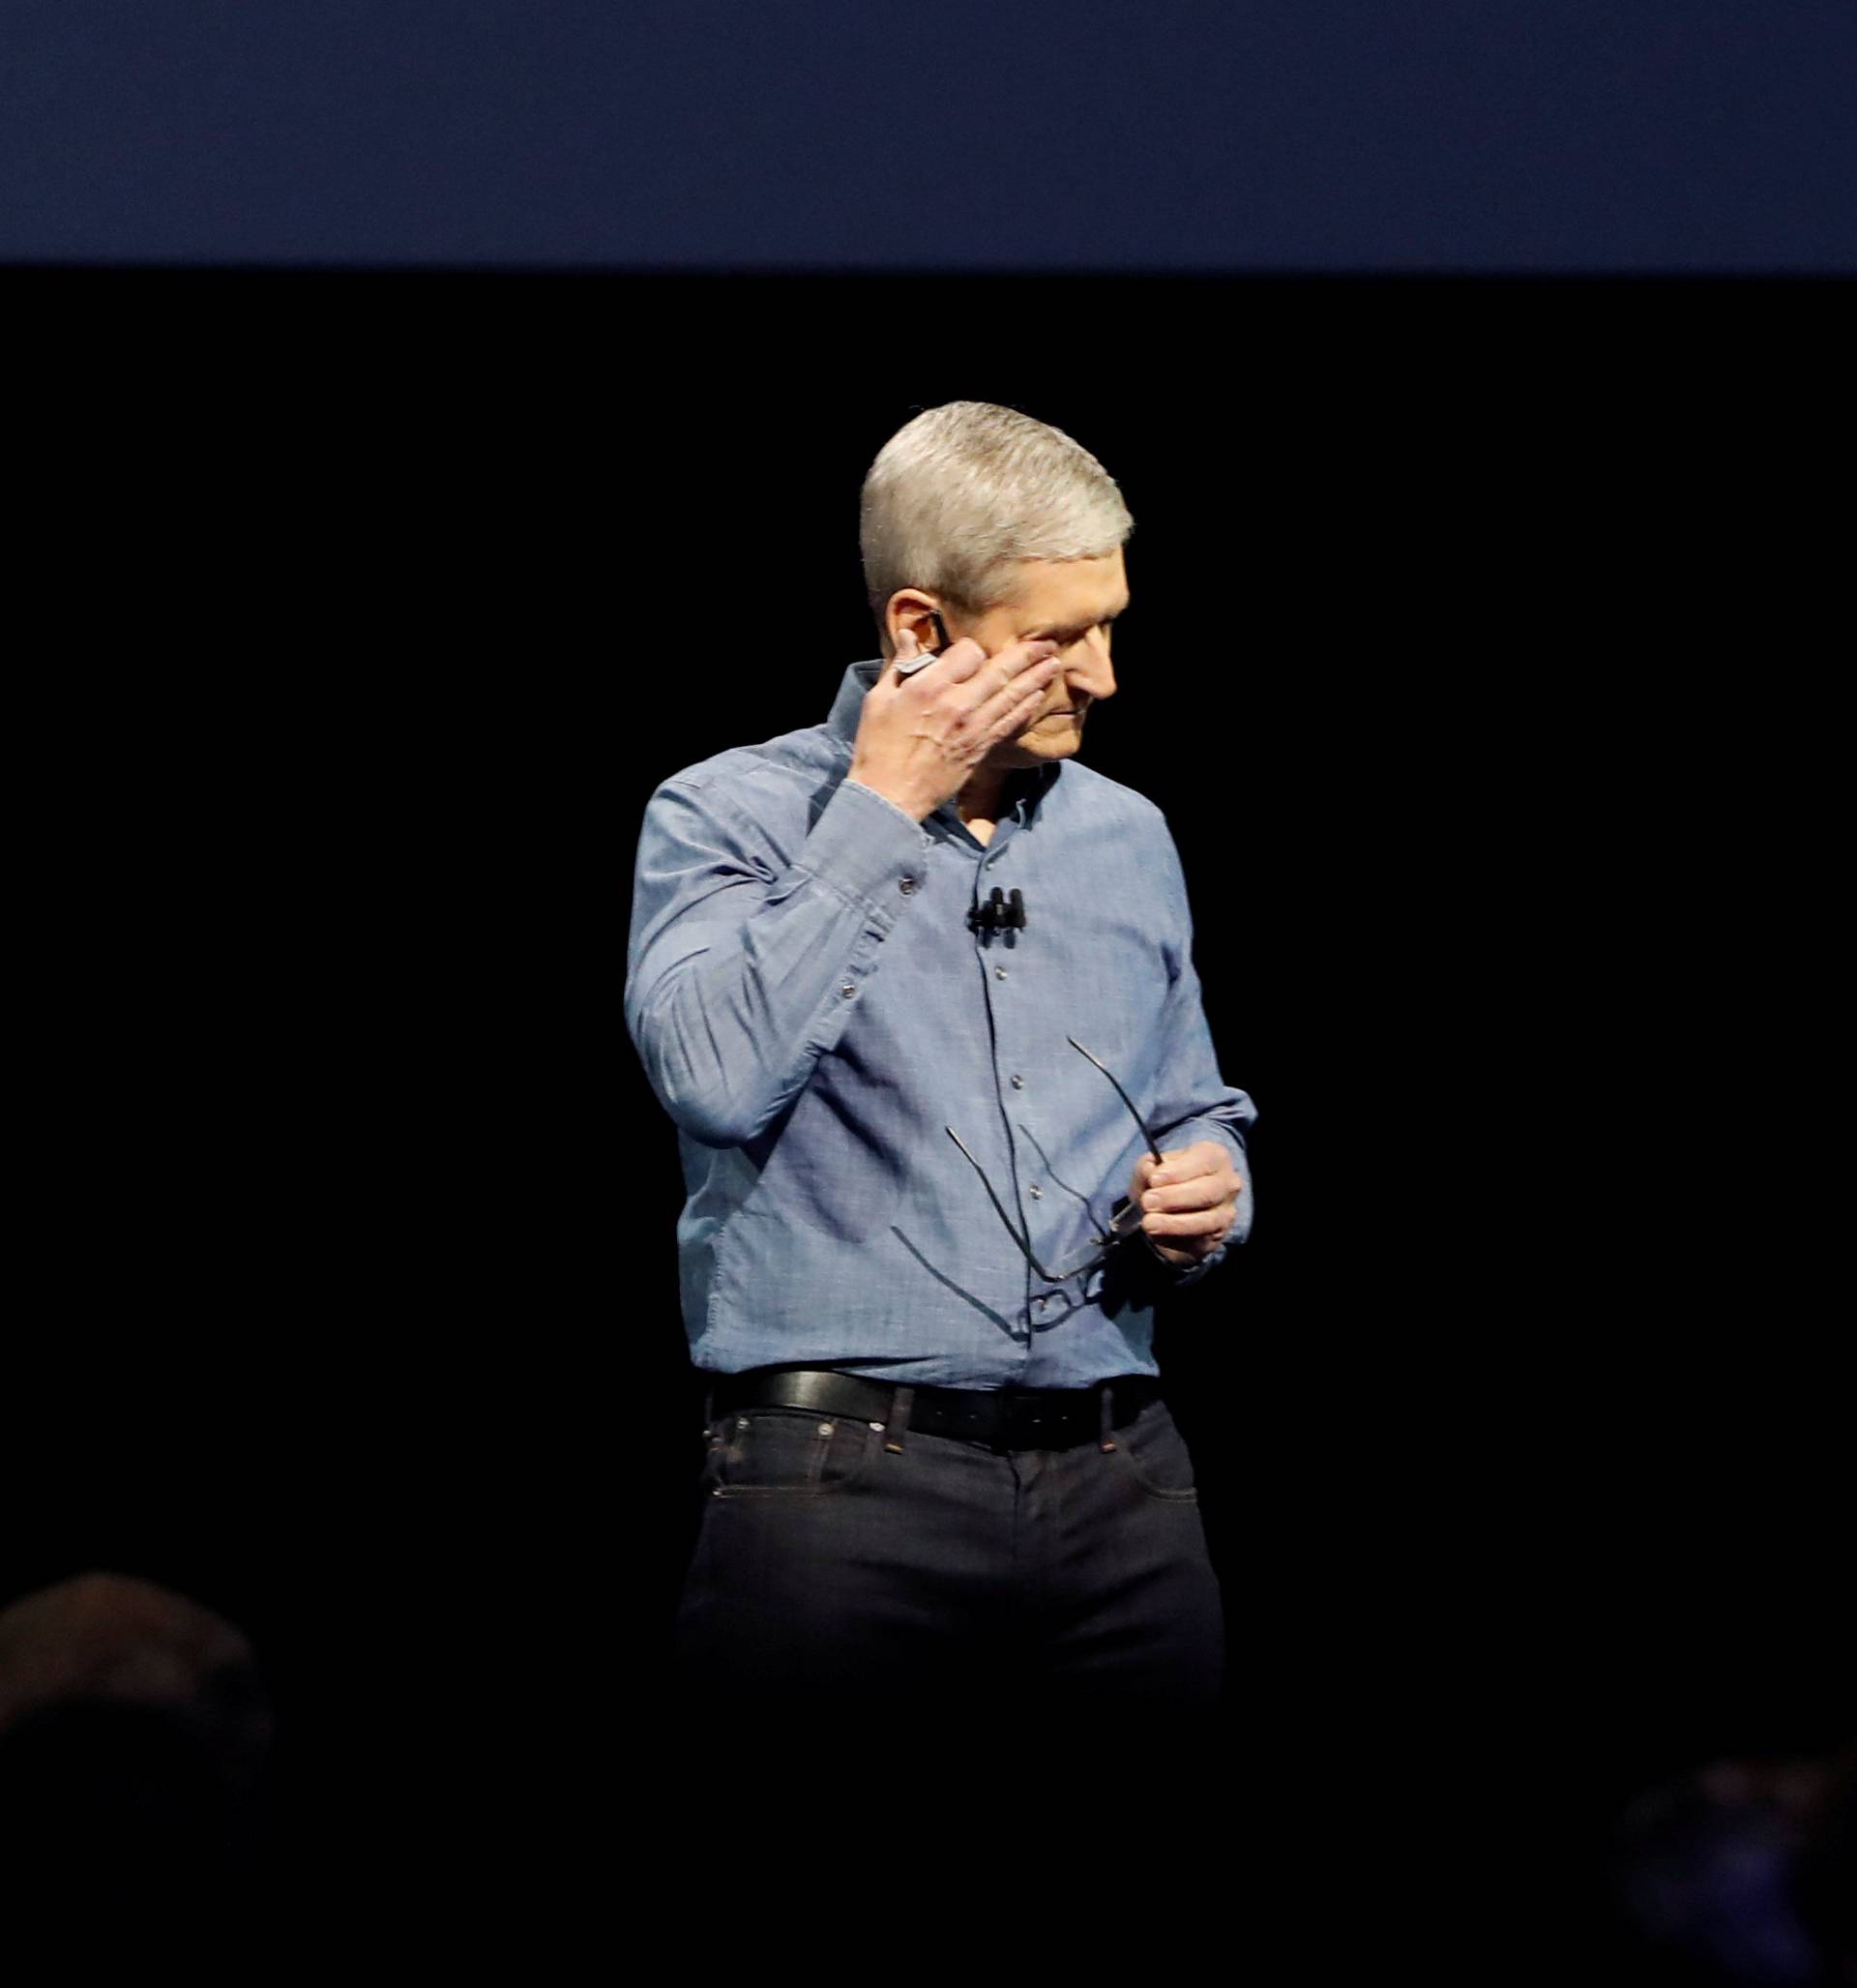 Apple Inc. CEO Tim Cook wipes his eyes after leading a moment of silence for the victims of the attack in Orlando as he opens the company's World Wide Developers Conference in San Francisco, California